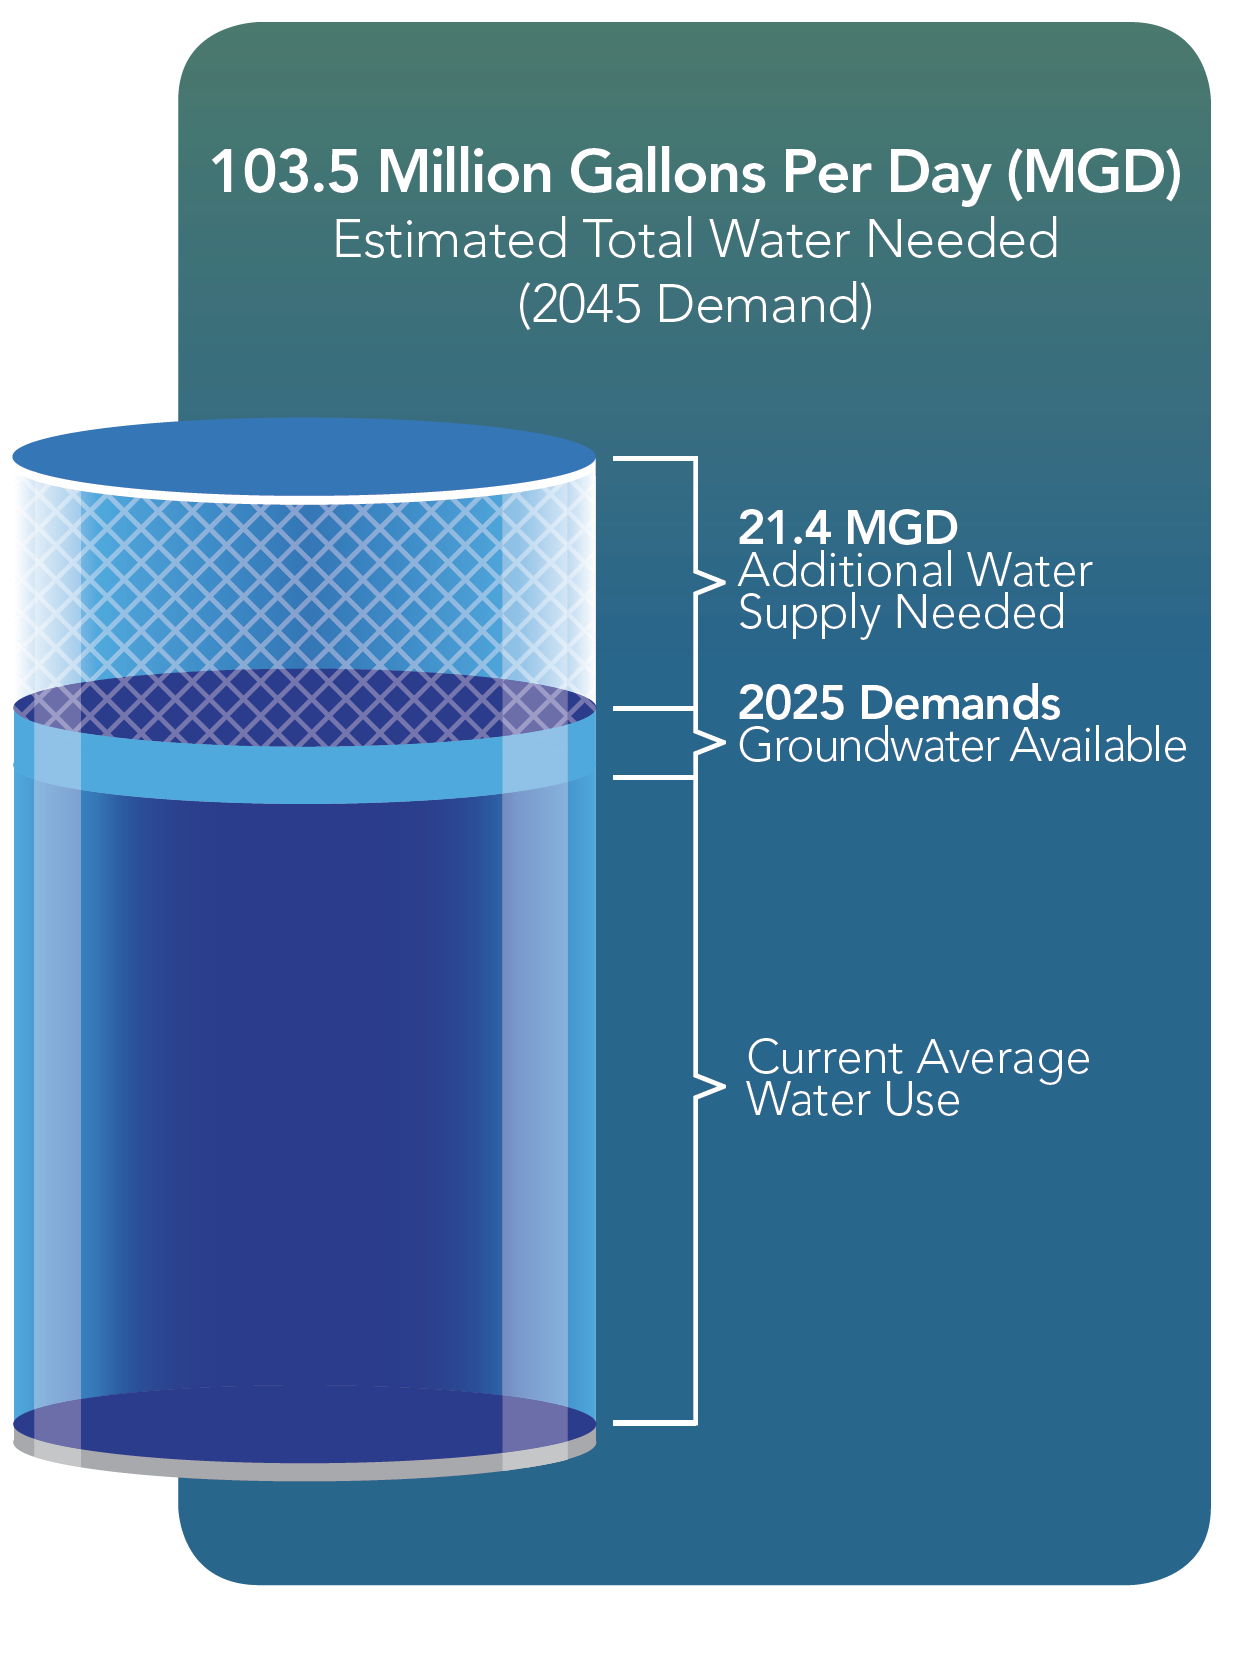 Estimated Total Water Needed by 2045